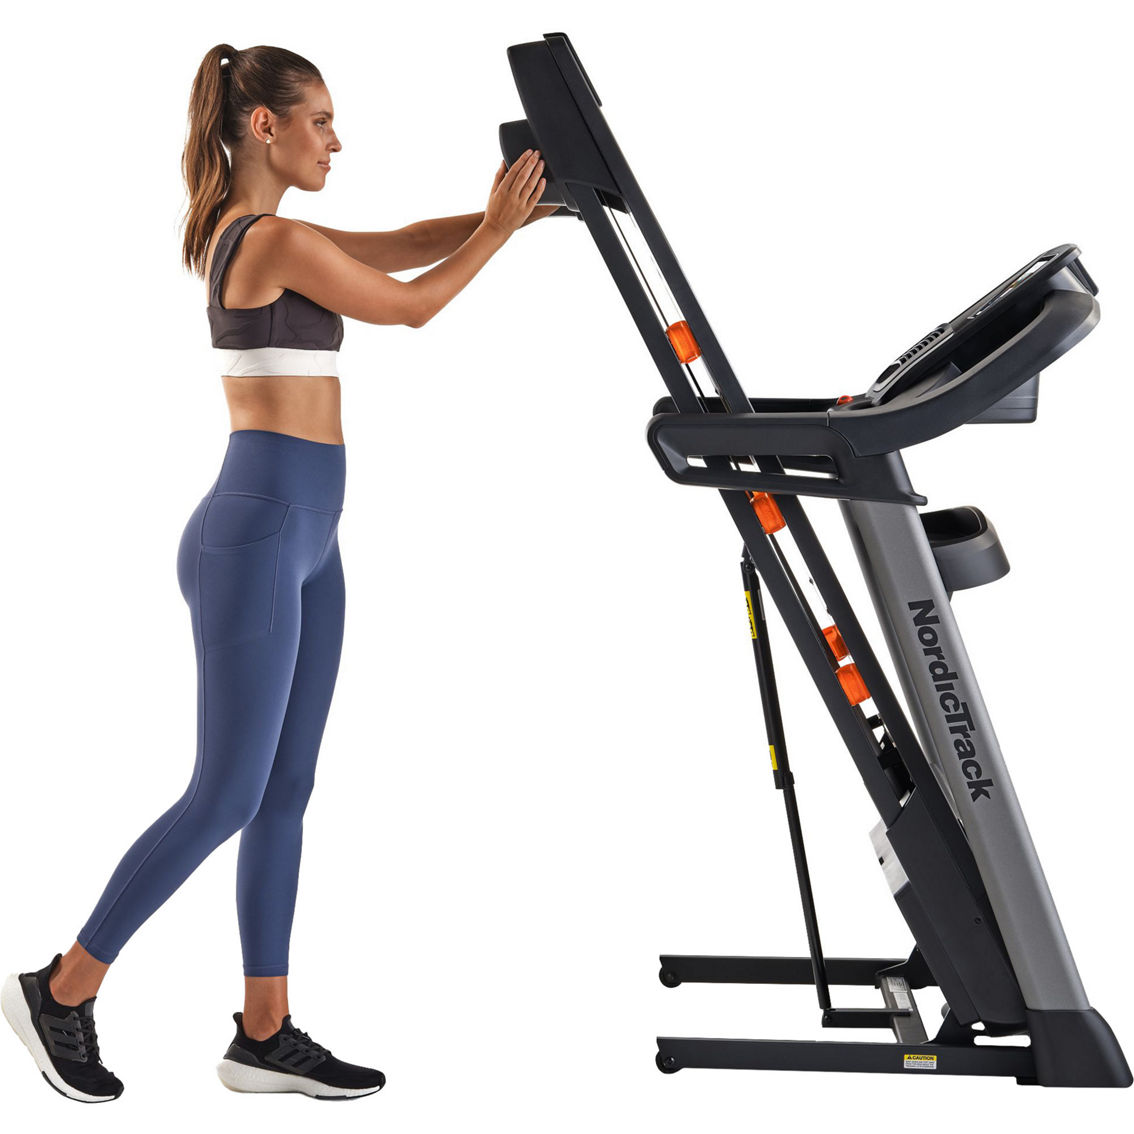 NordicTrack T8.5S Treadmill - Image 4 of 4